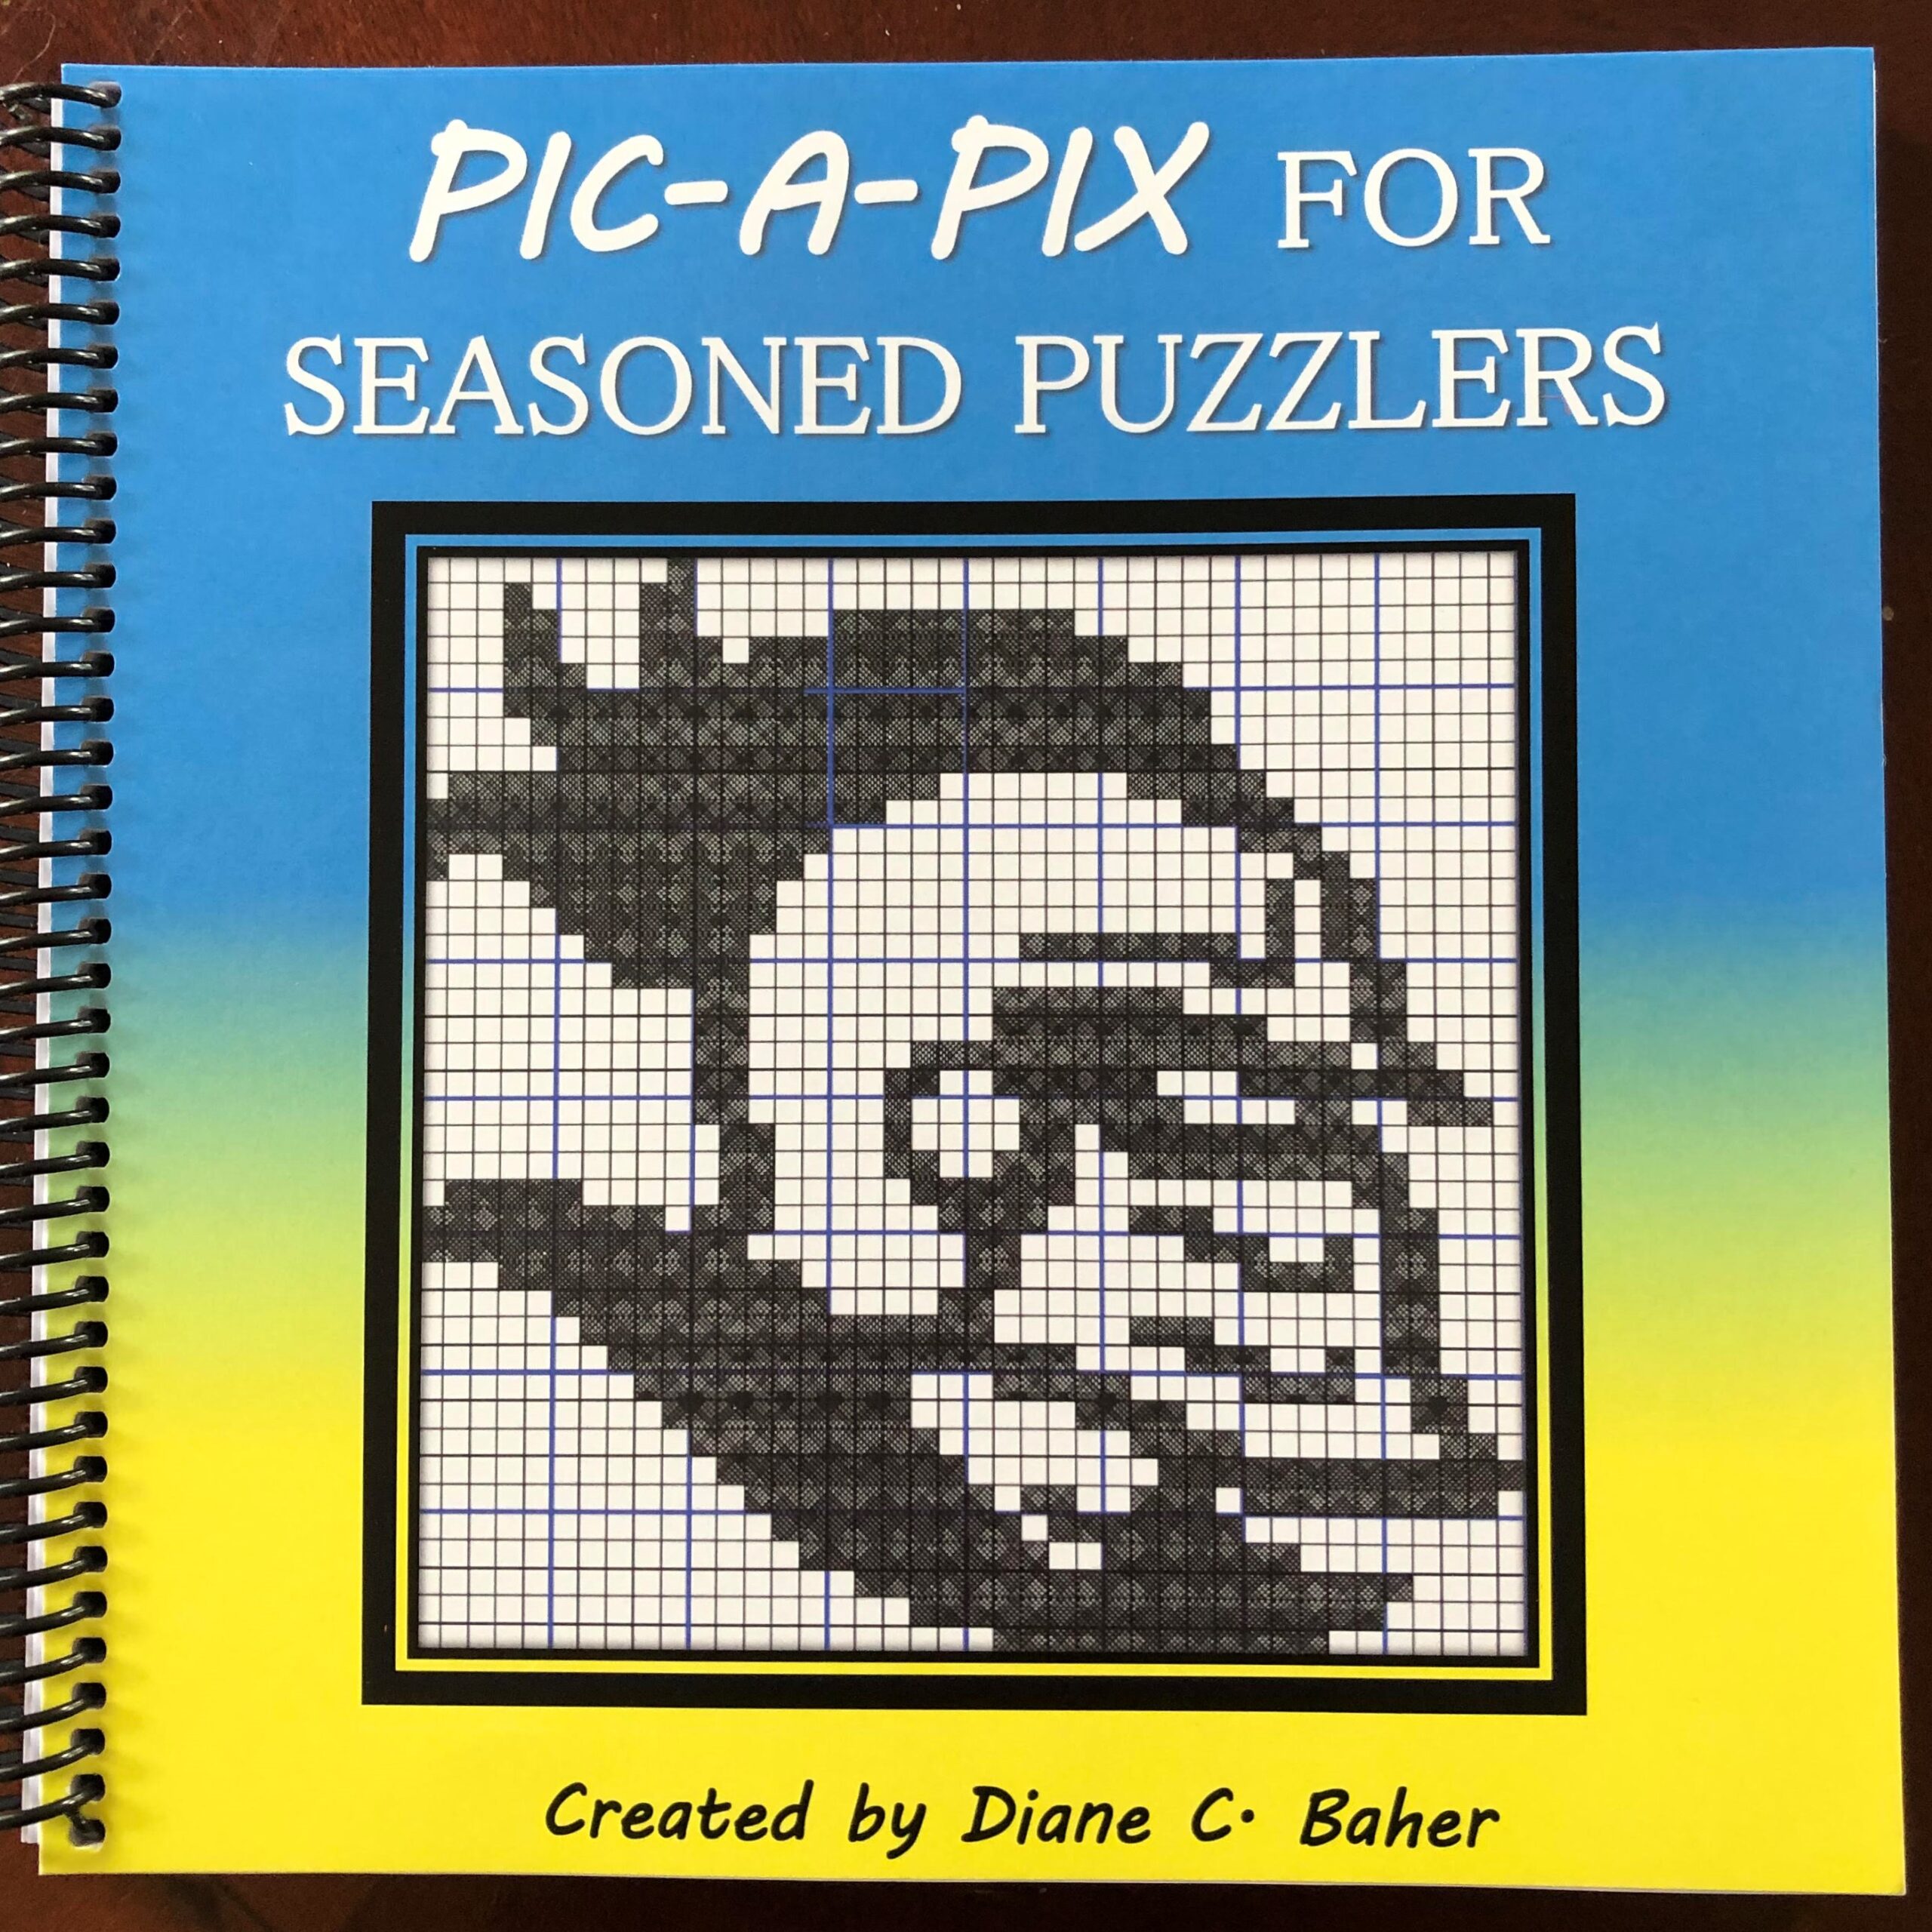 Pic-a-Pix Puzzles for Seasoned Puzzlers by Diane Baher